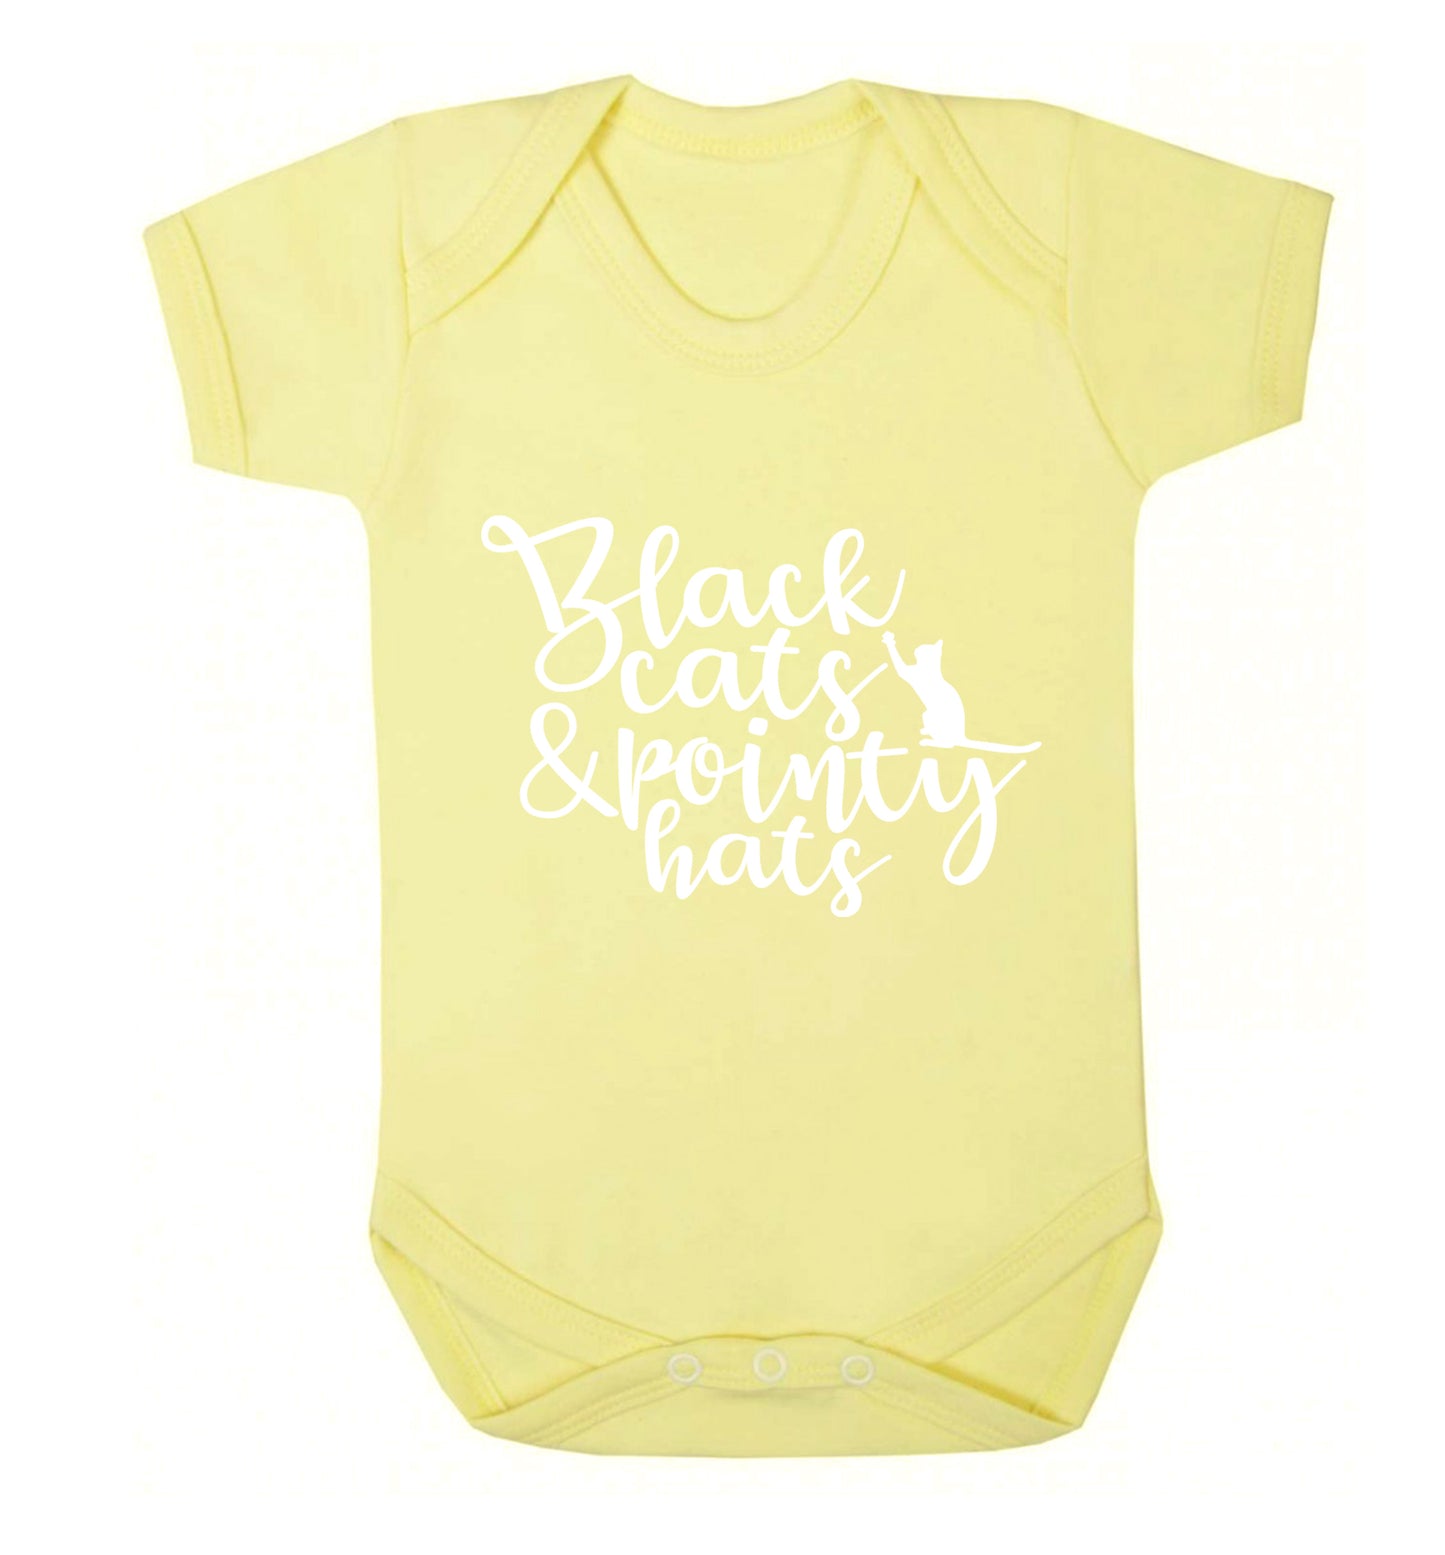 Black cats and pointy hats Baby Vest pale yellow 18-24 months